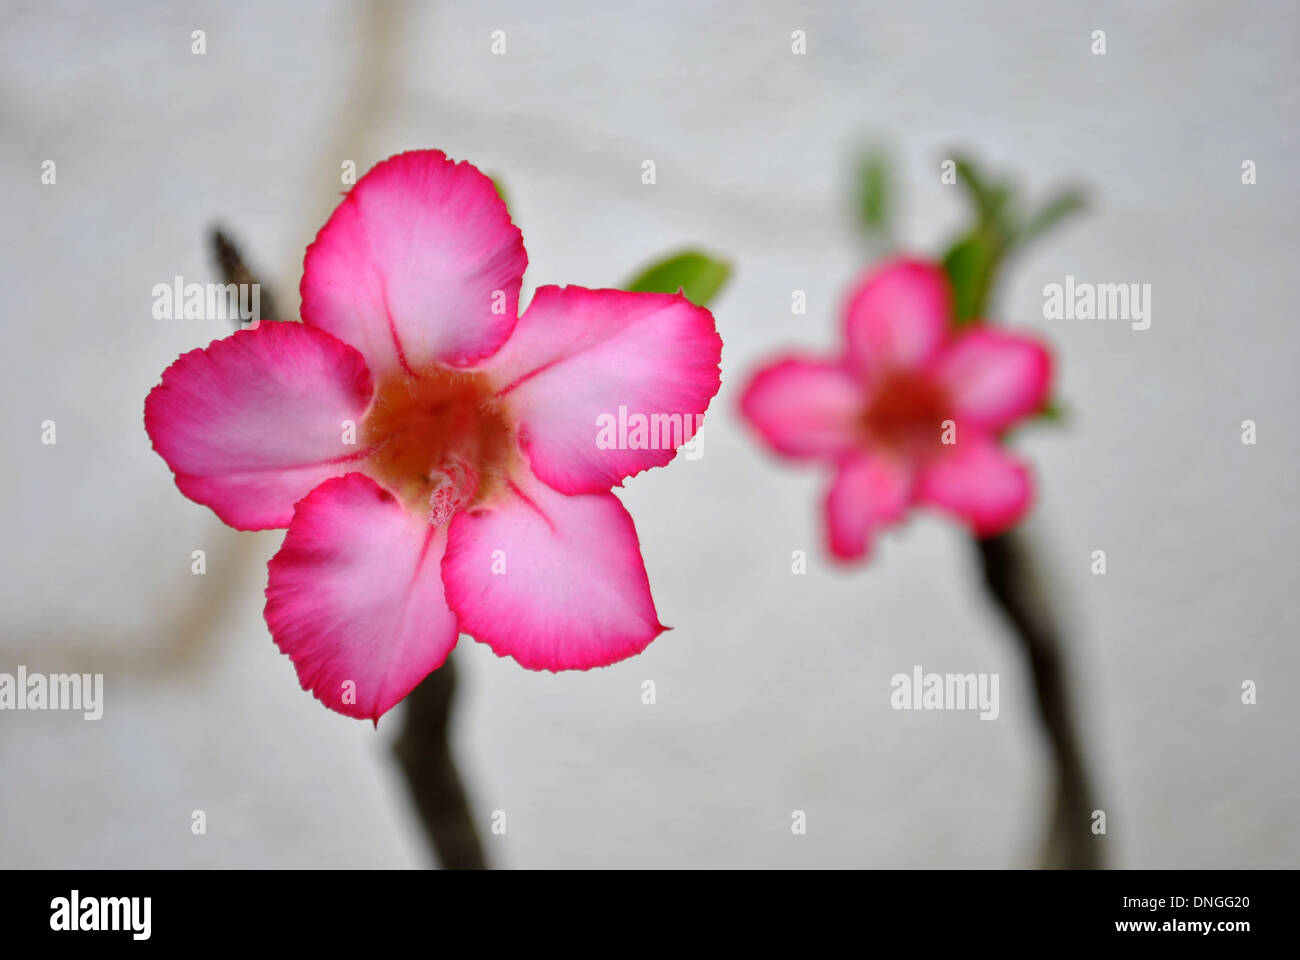 Two Beautiful Pink Desert Roses on the terrace garden Stock Photo